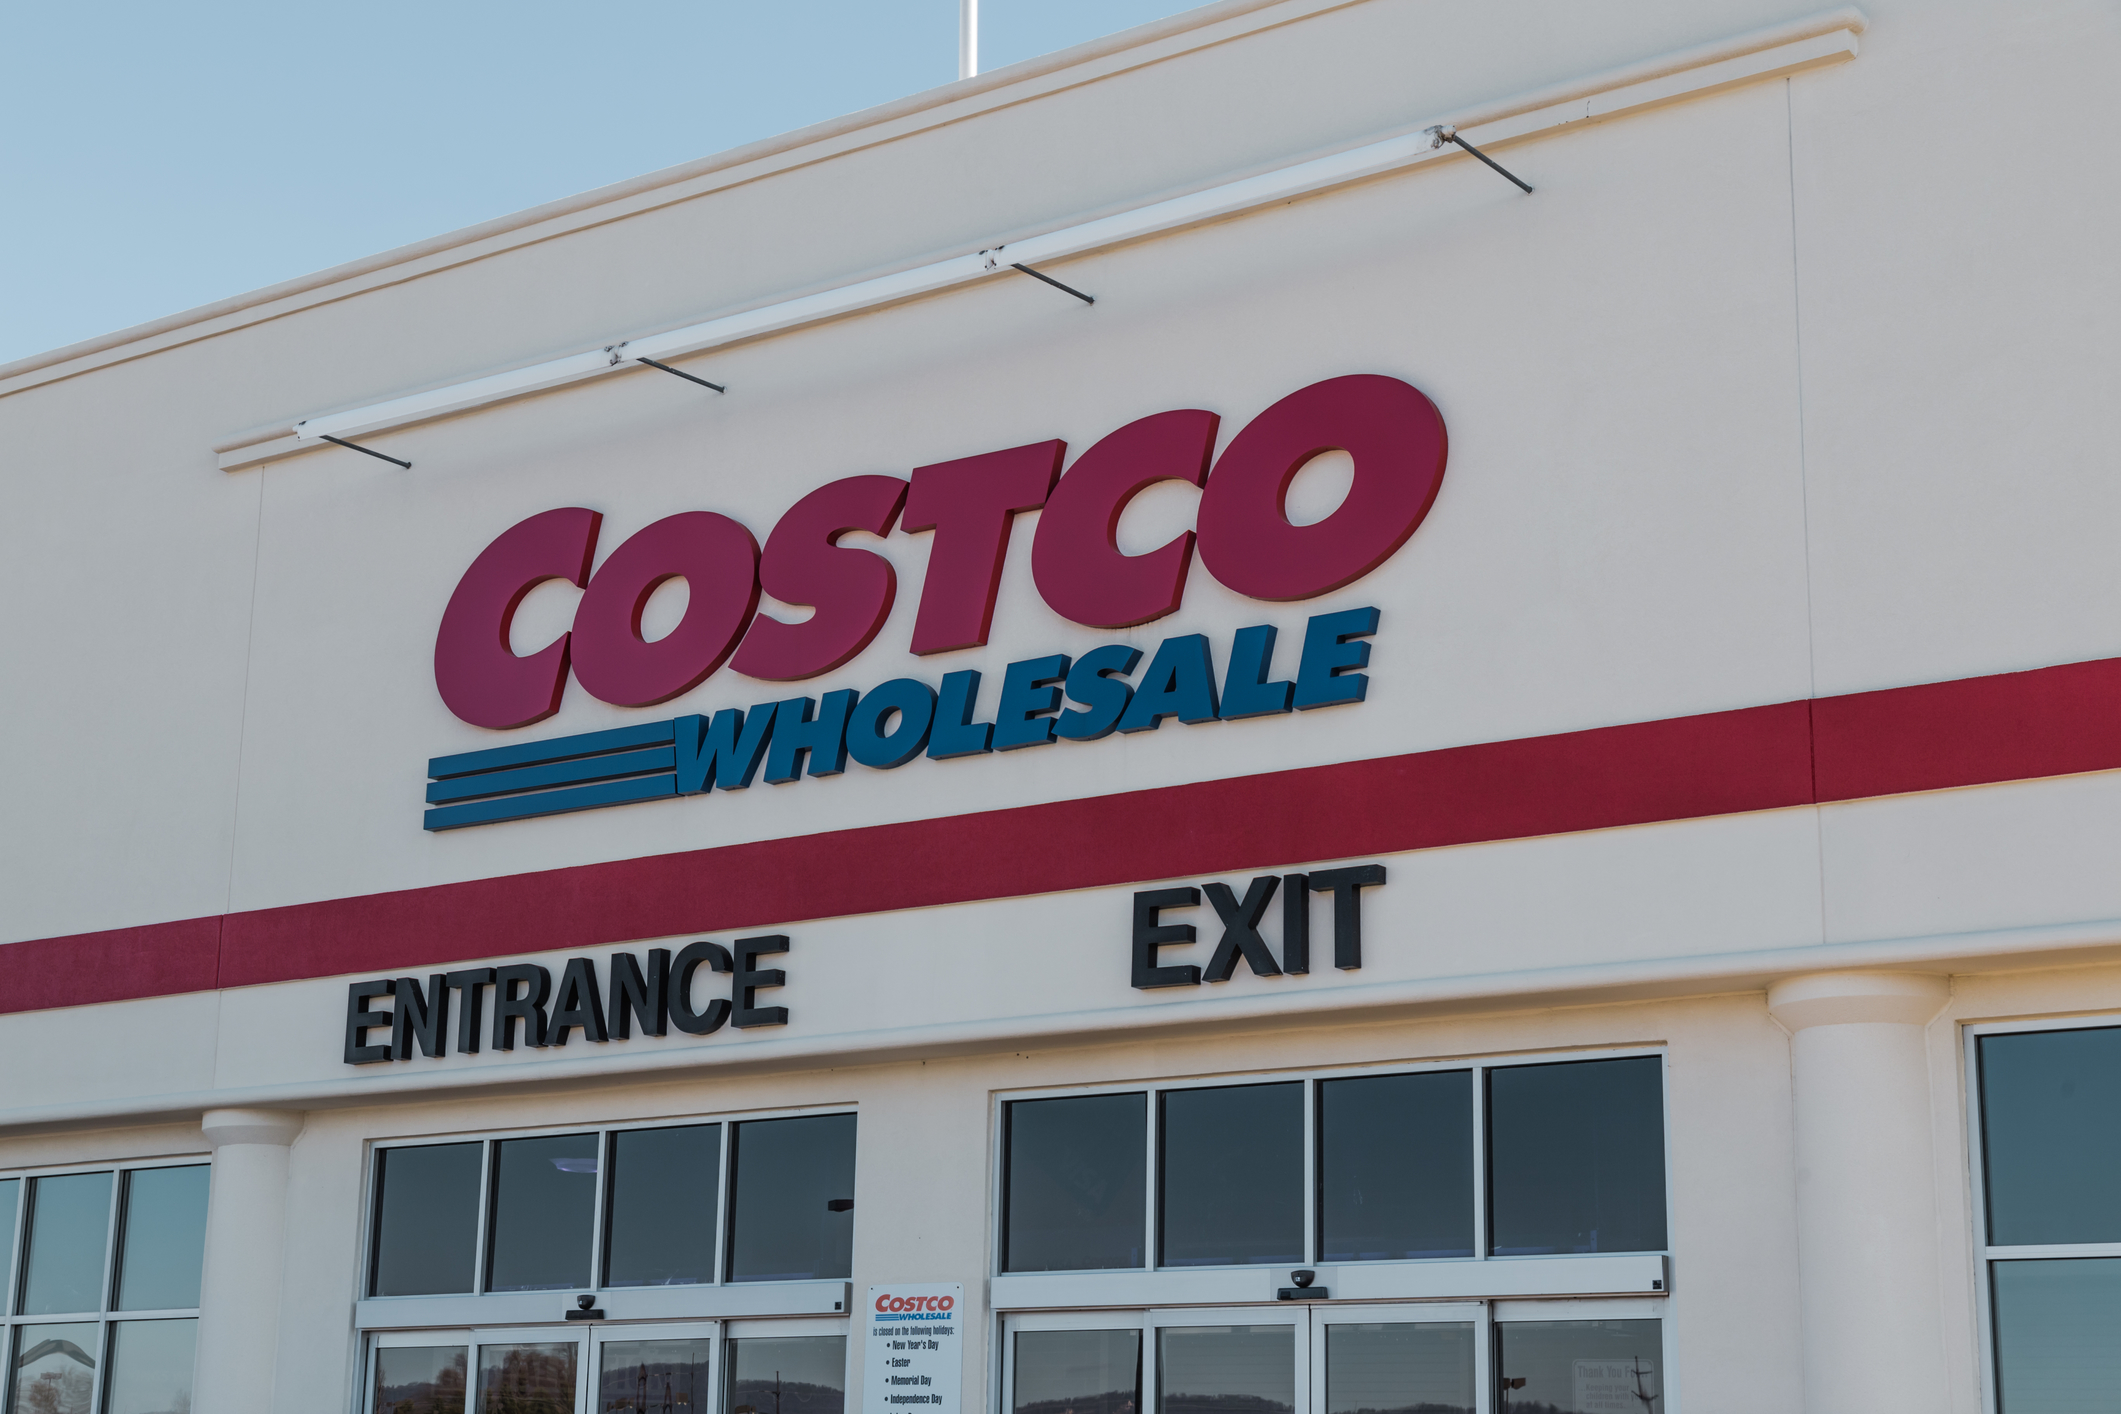 Free $40 Gift Card with Costco Black Friday Membership Deal